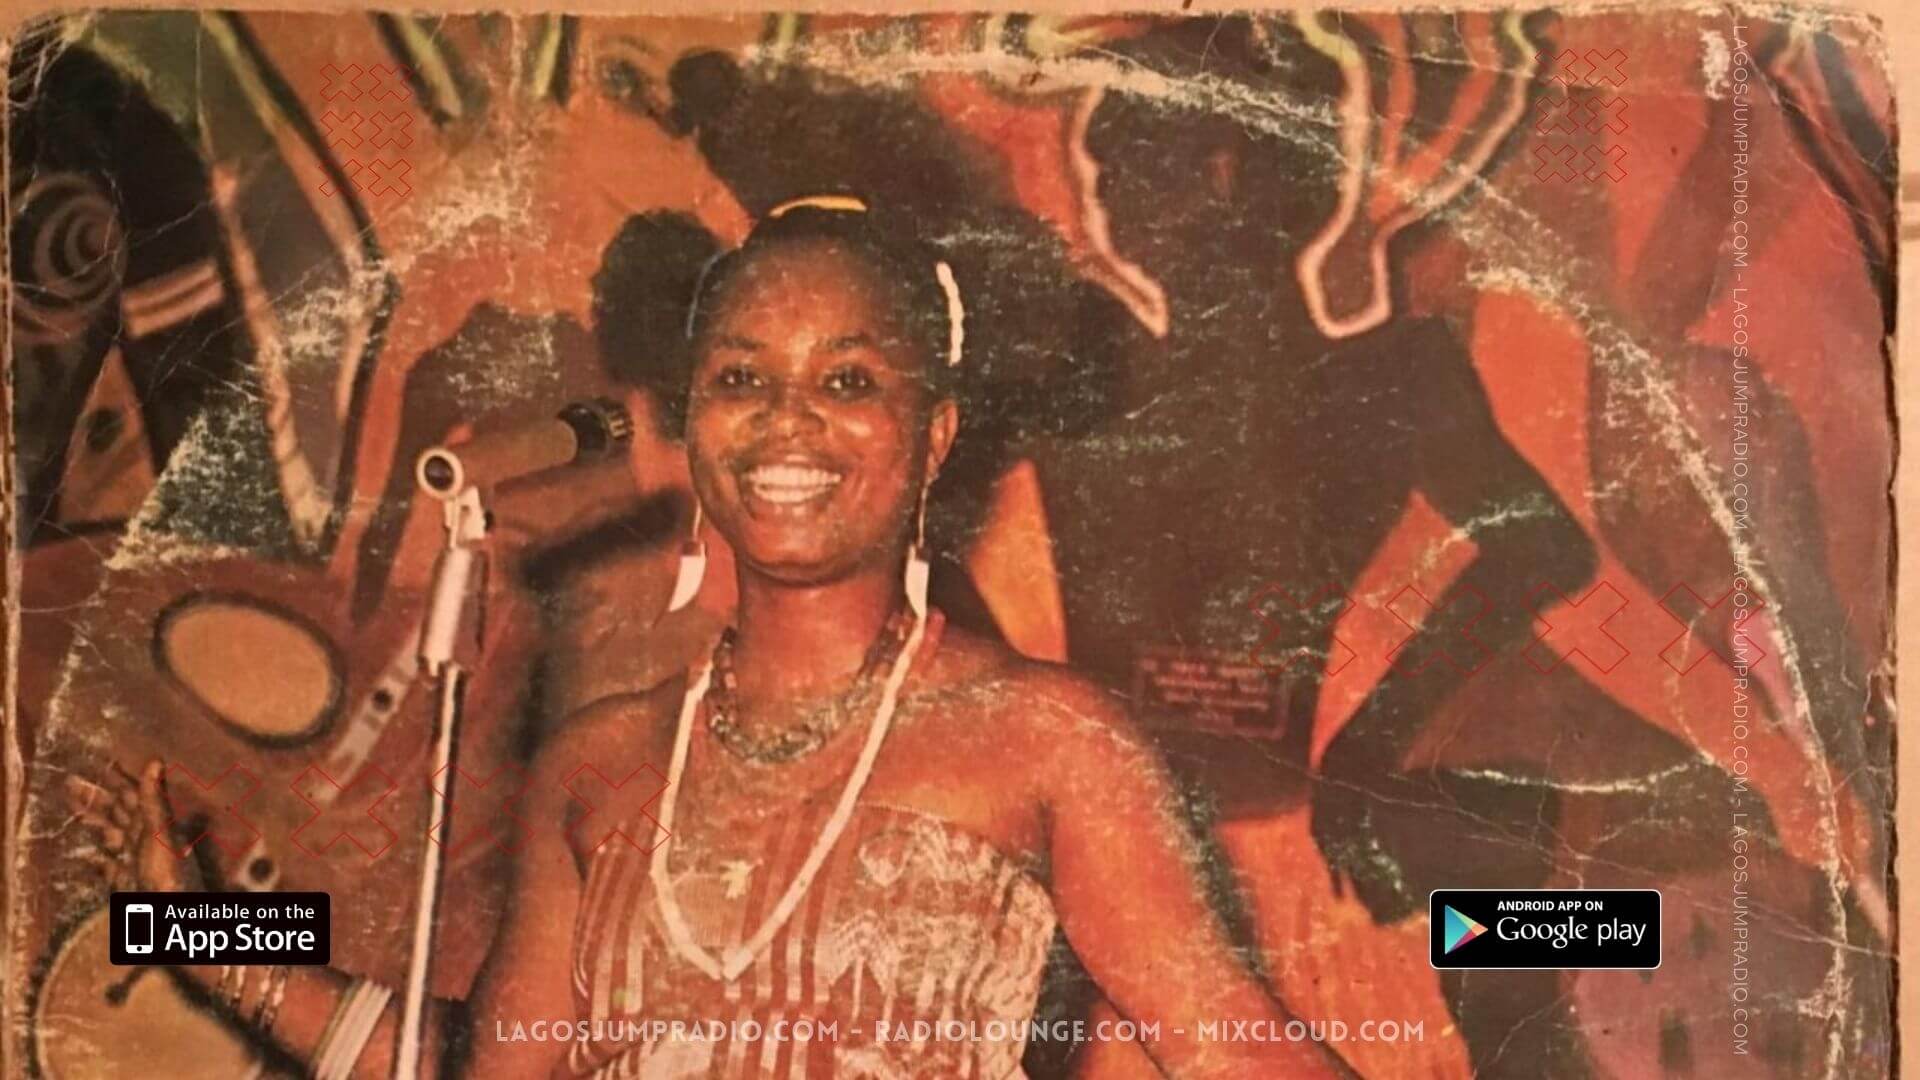 Nelly Uchendu's name is synonymous with Igbo highlife music. This iconic Nigerian singer left an undeniable mark with her powerful vocals and ability to modernize traditional sounds.